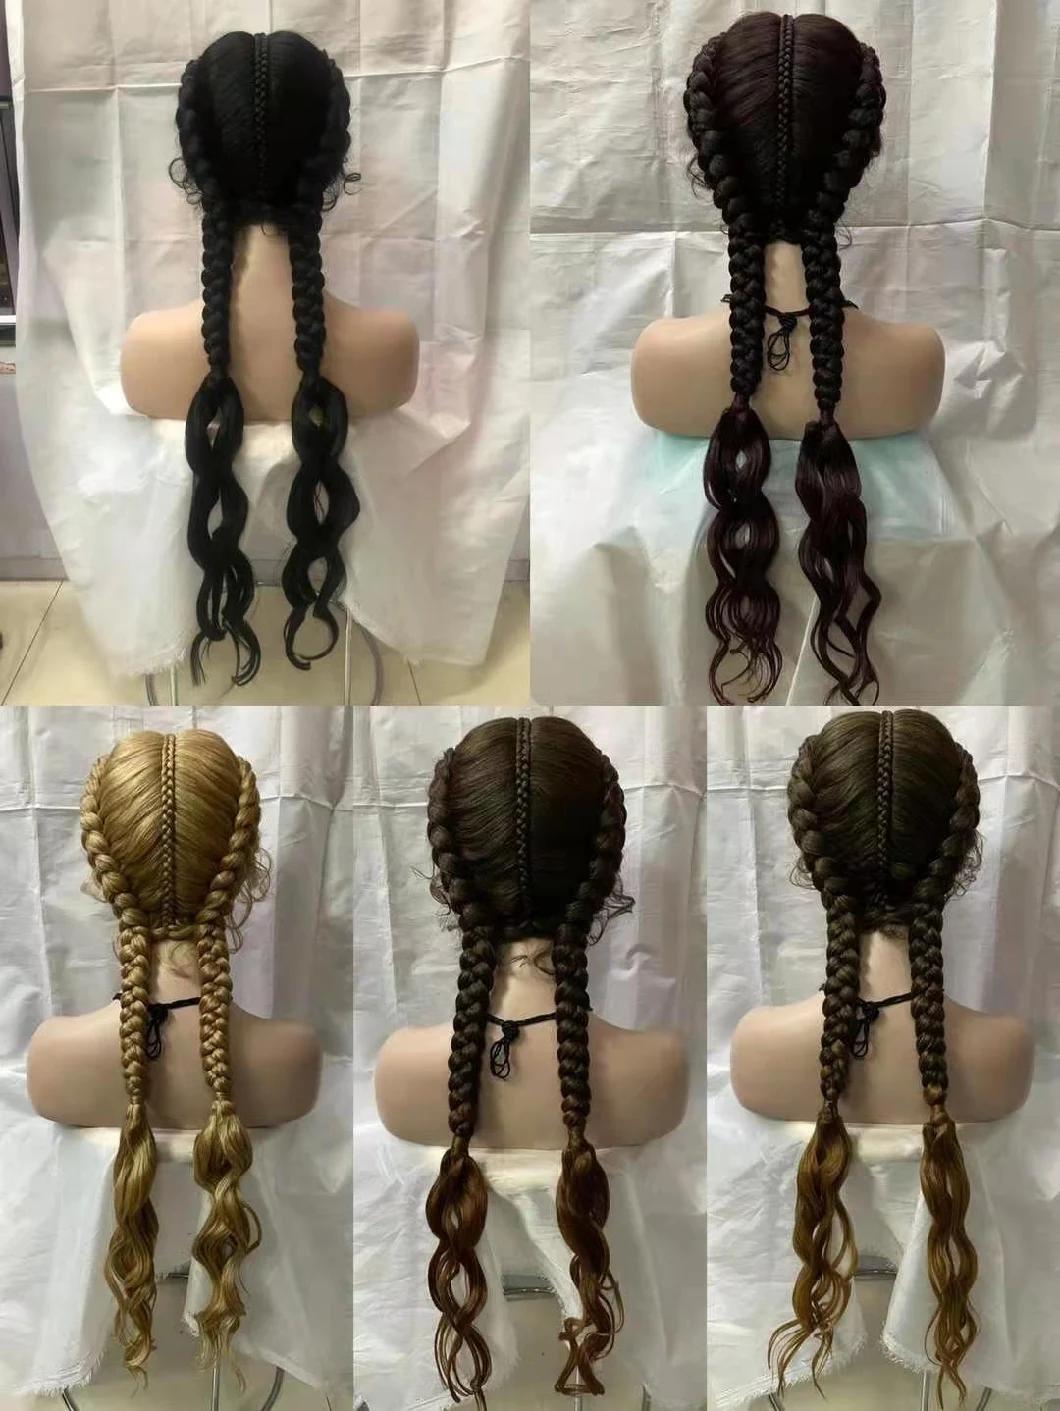 Braided Wigs for Women 100% Hand Braided 360 Swiss Lace Front Black Double Dutch Braided Wigs with Baby Hair for Women